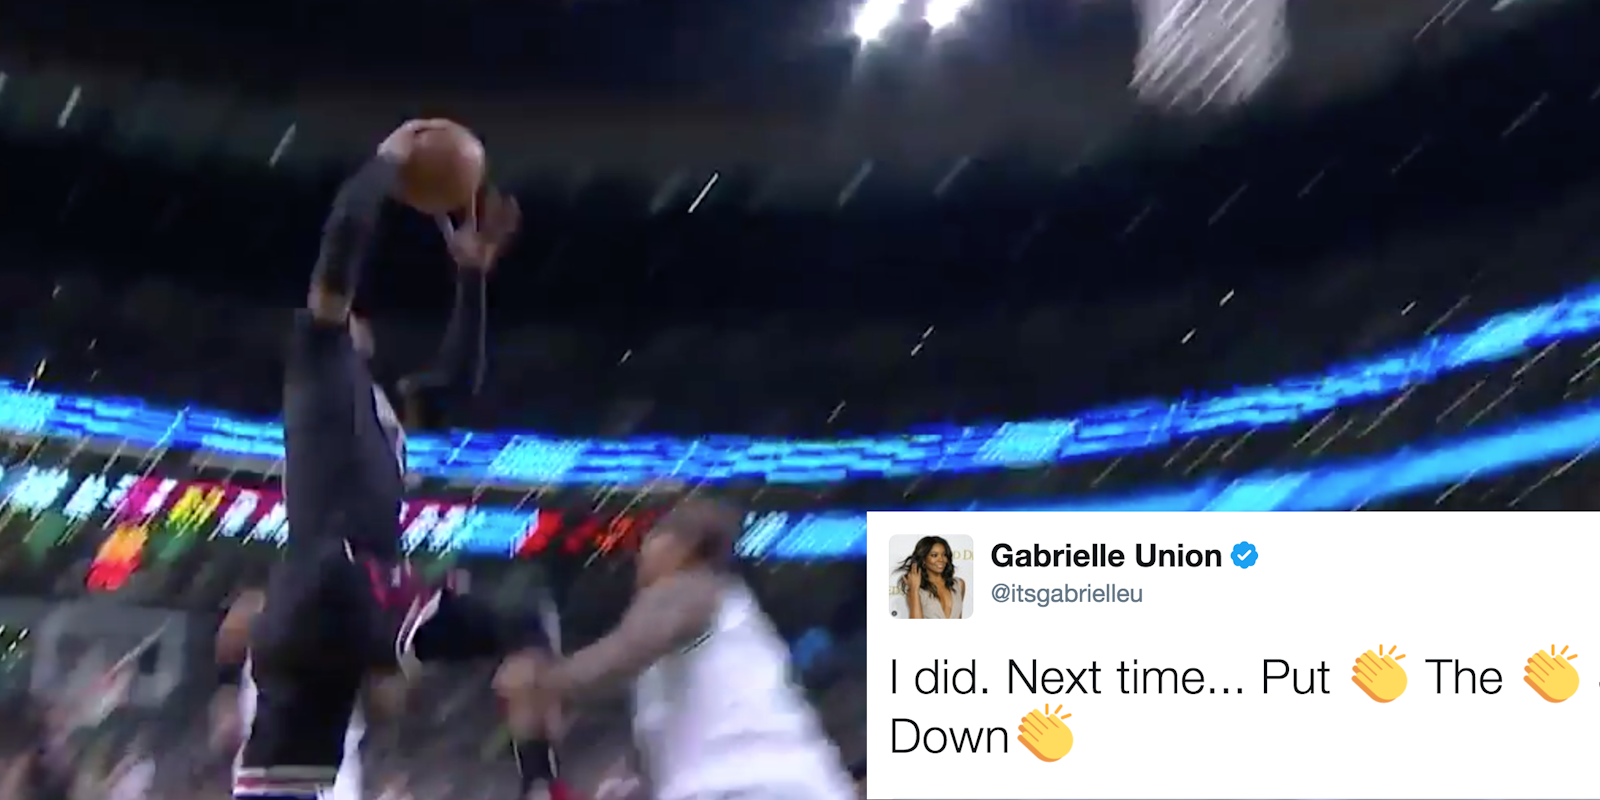 Dwayne Wade missed dunk and Gabrielle Union‏'s tweet